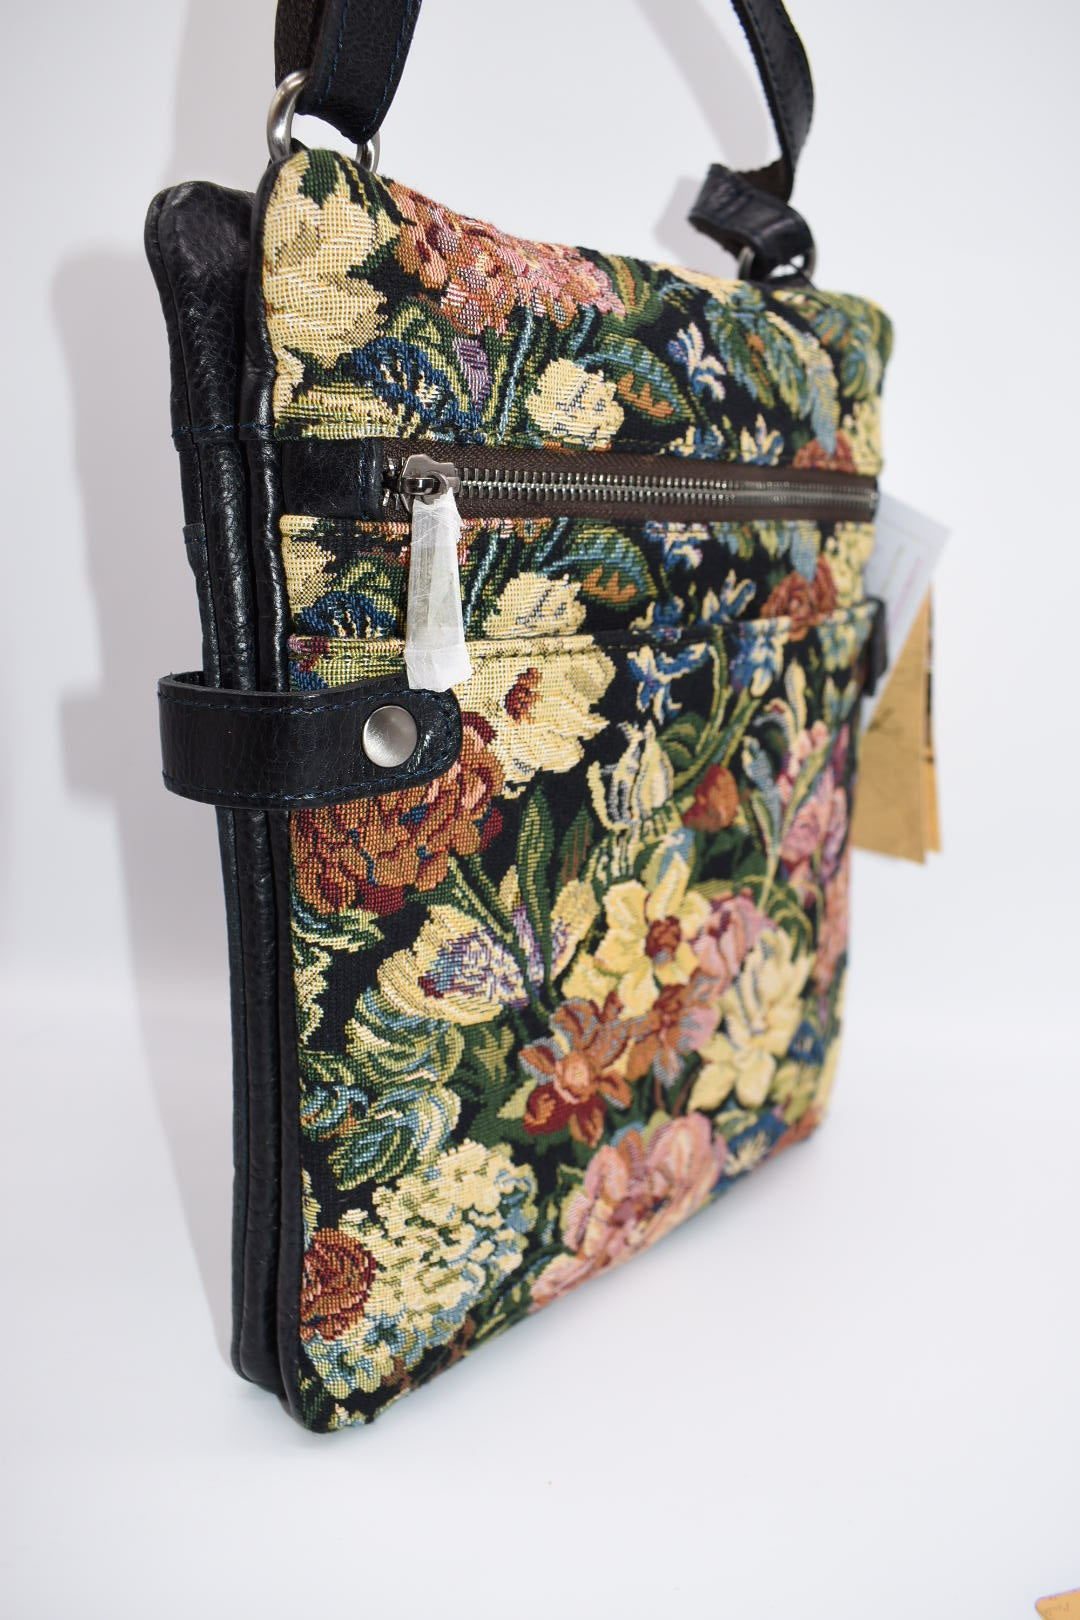 Patricia Nash Prizzi Leather Crossbody Bag in Woven Floral Tapestry